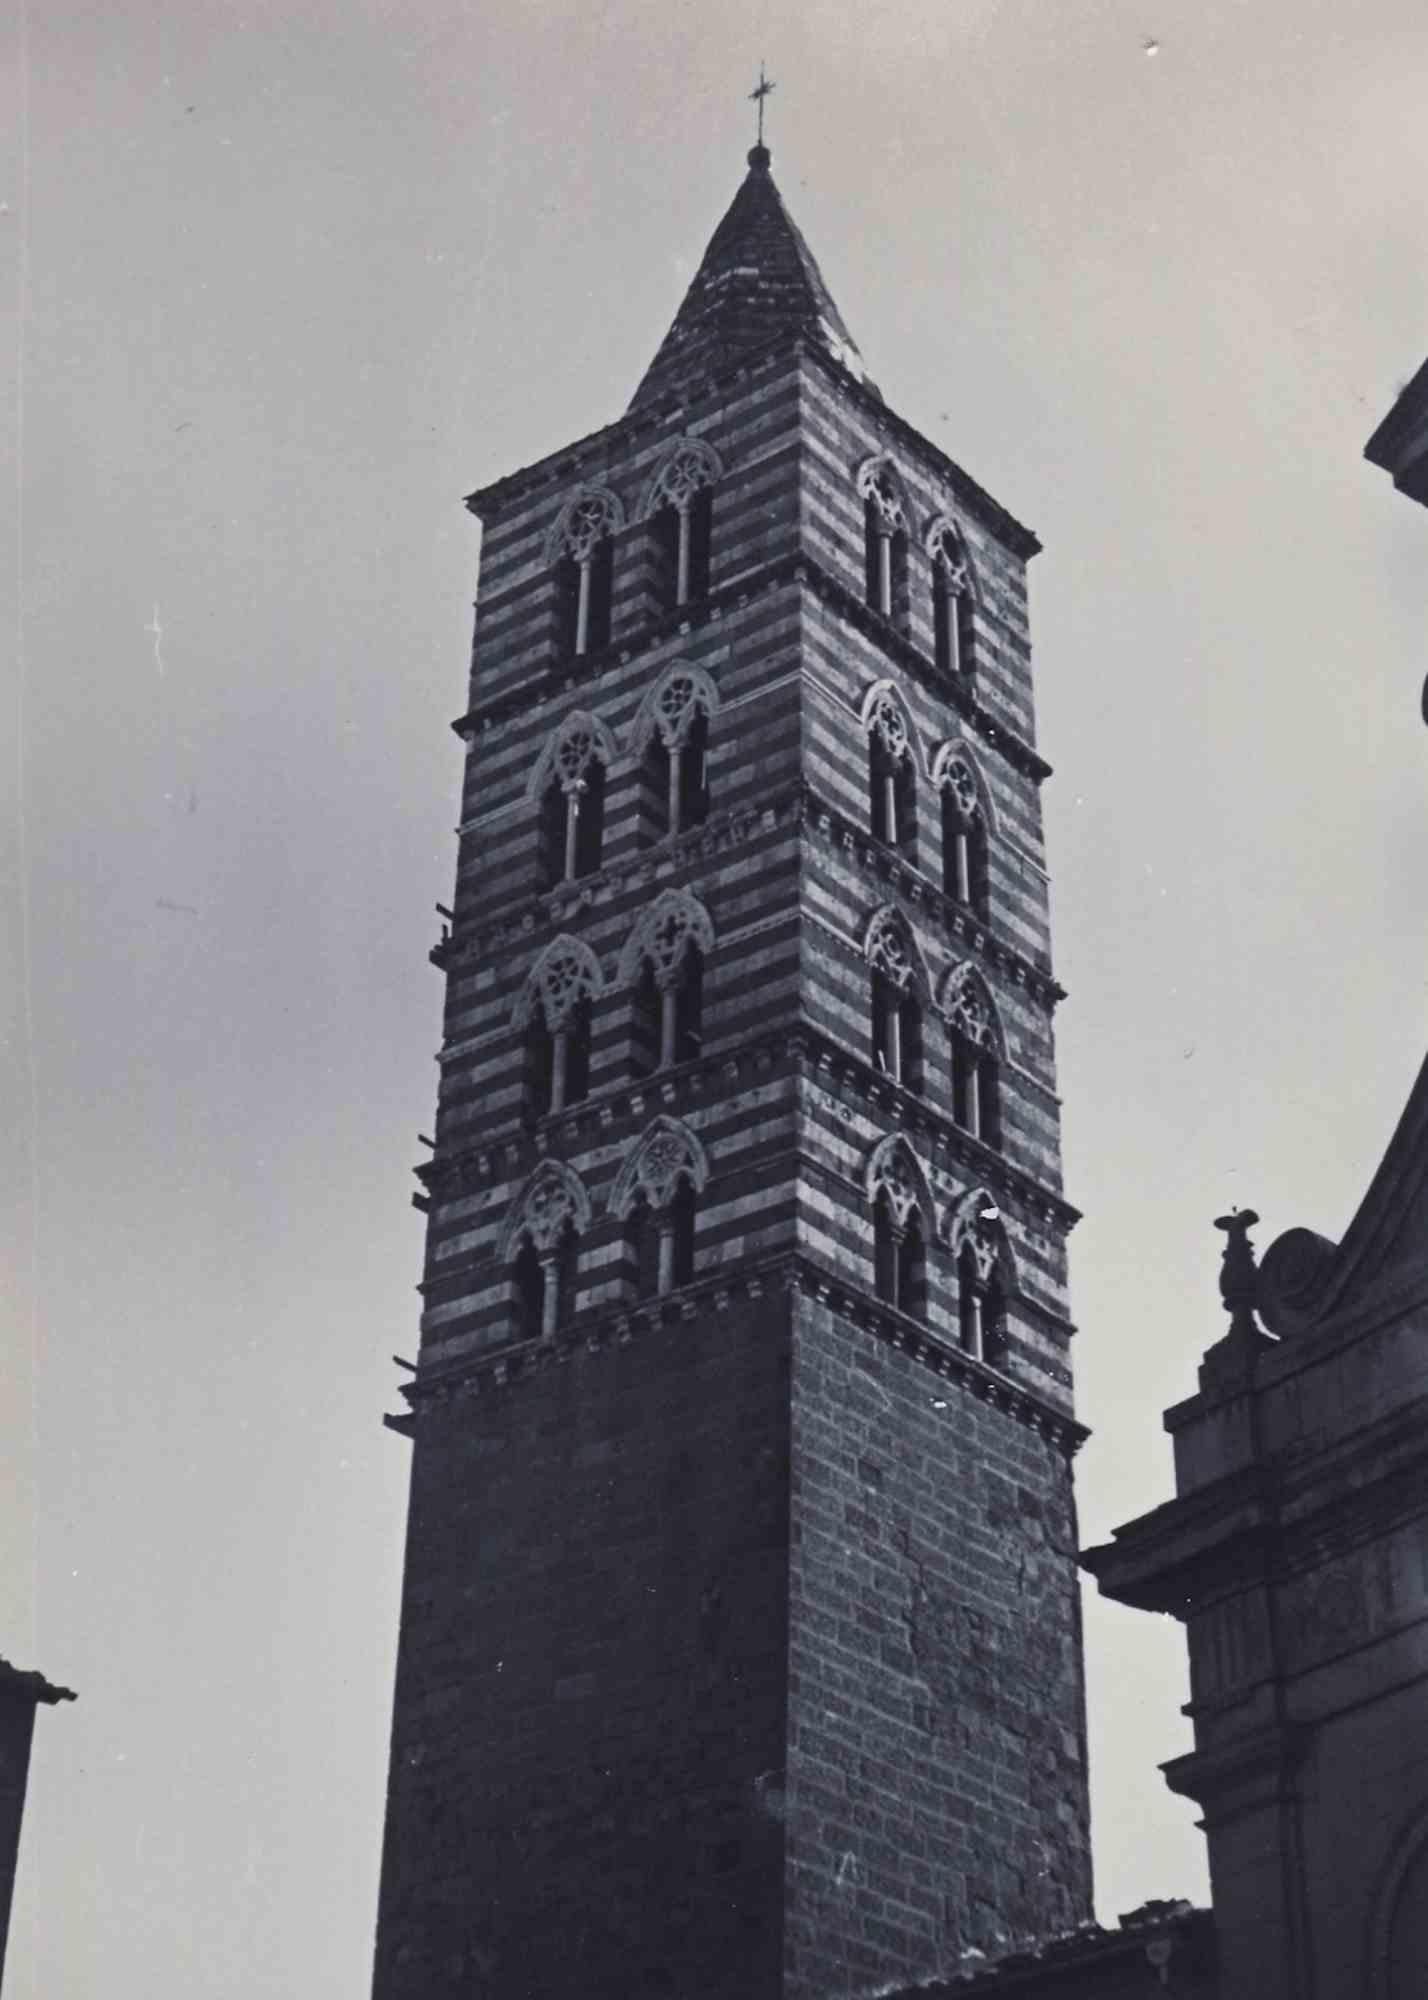 Unknown Landscape Photograph - Old days Photo - Church Tower - Vintage Photo - Mid-20th Century